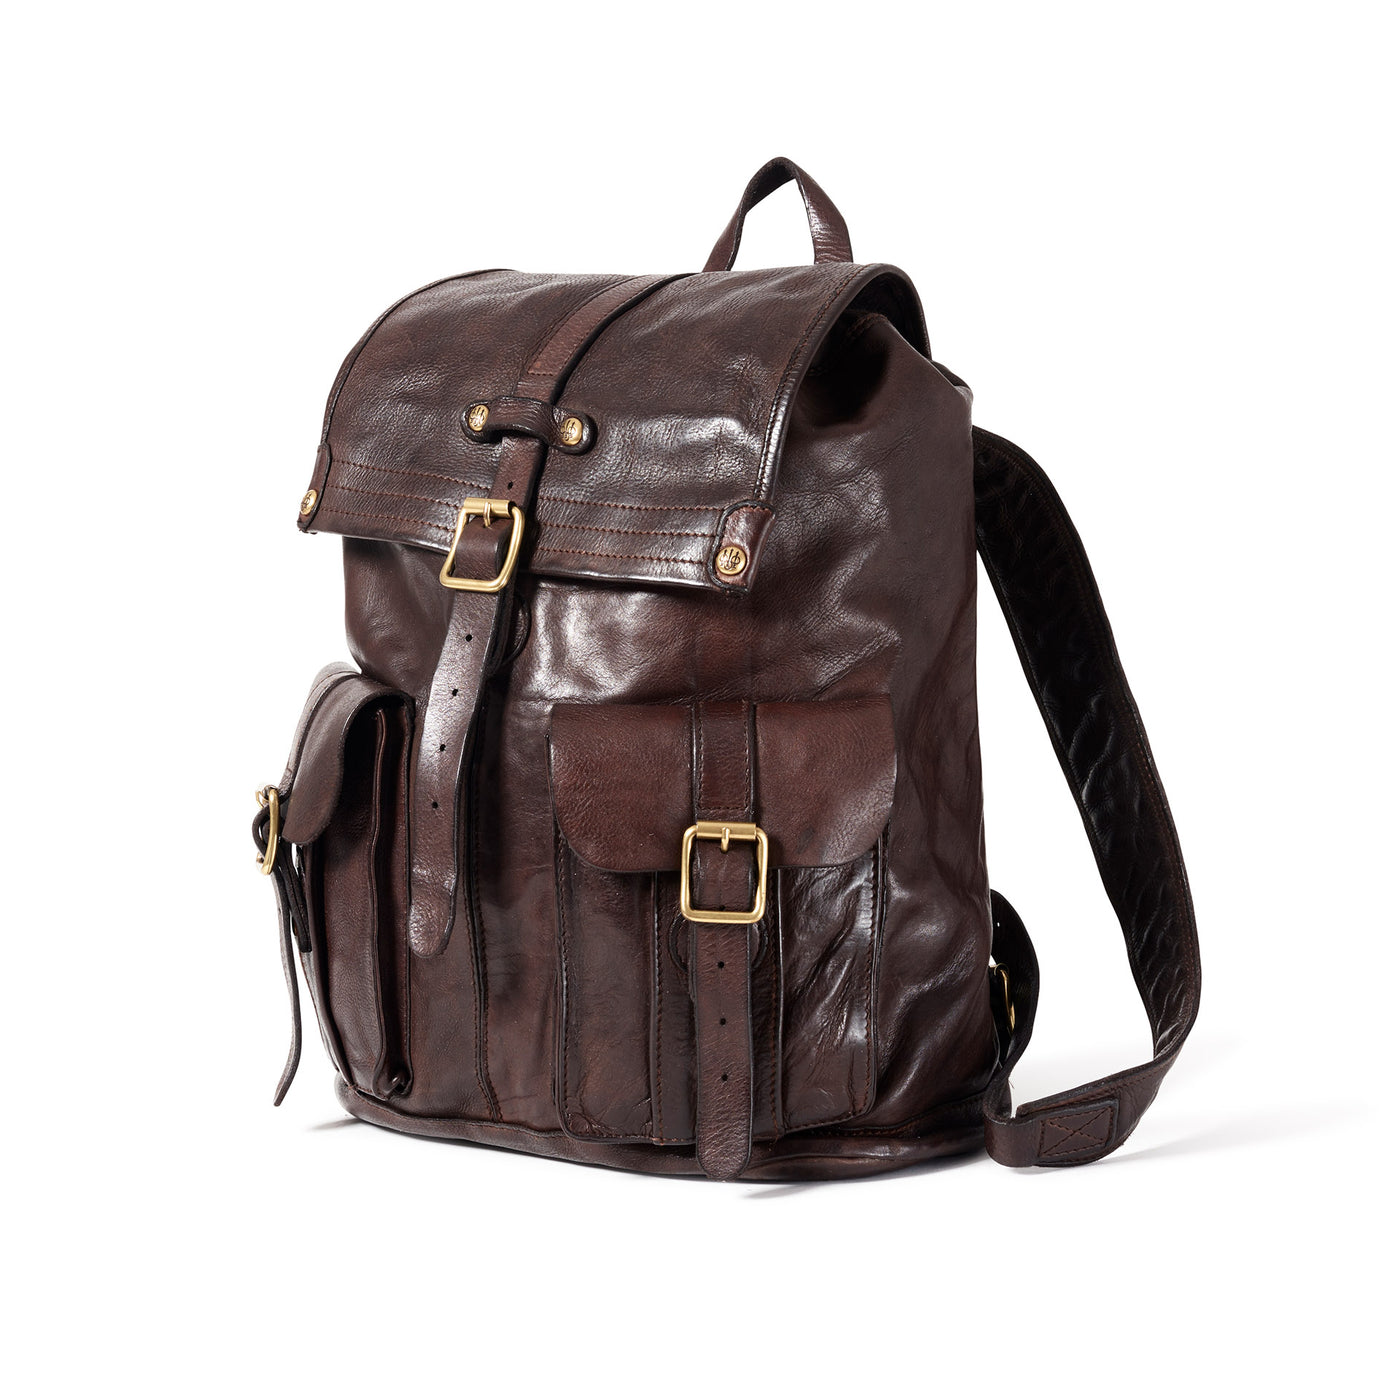 Washed Leather Backpack - Dark Brown